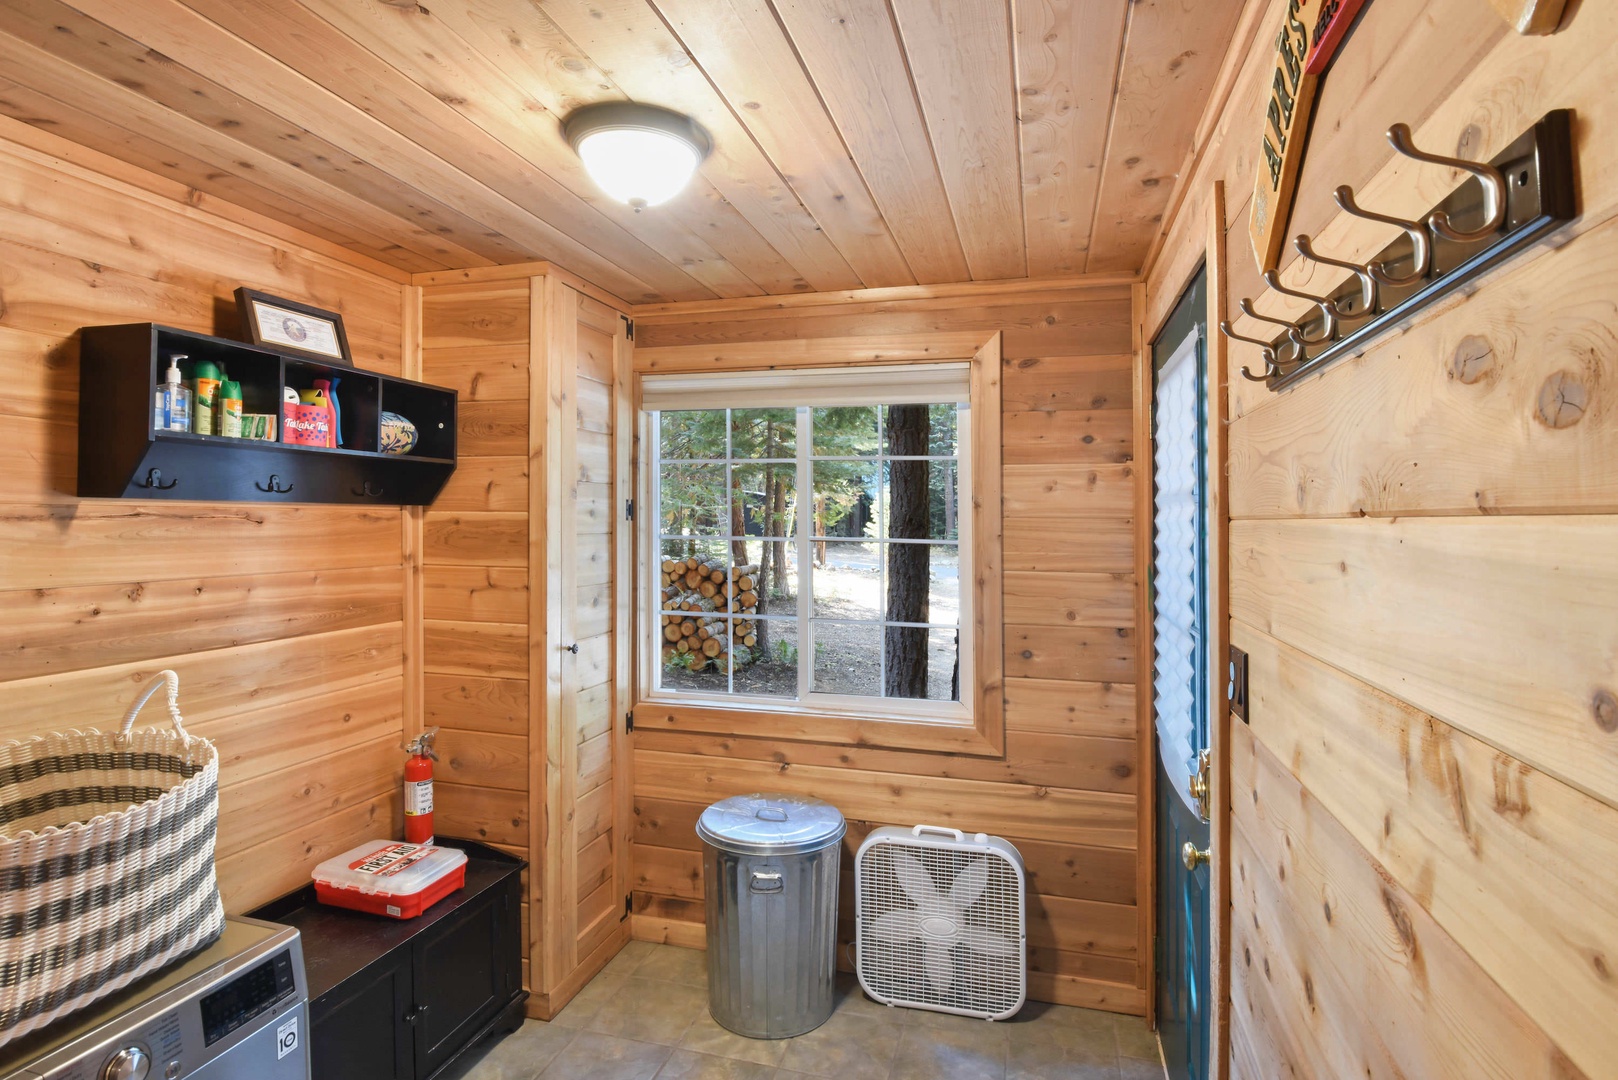 Mud room for storing skis, snowboards, boots - has washer no dryer